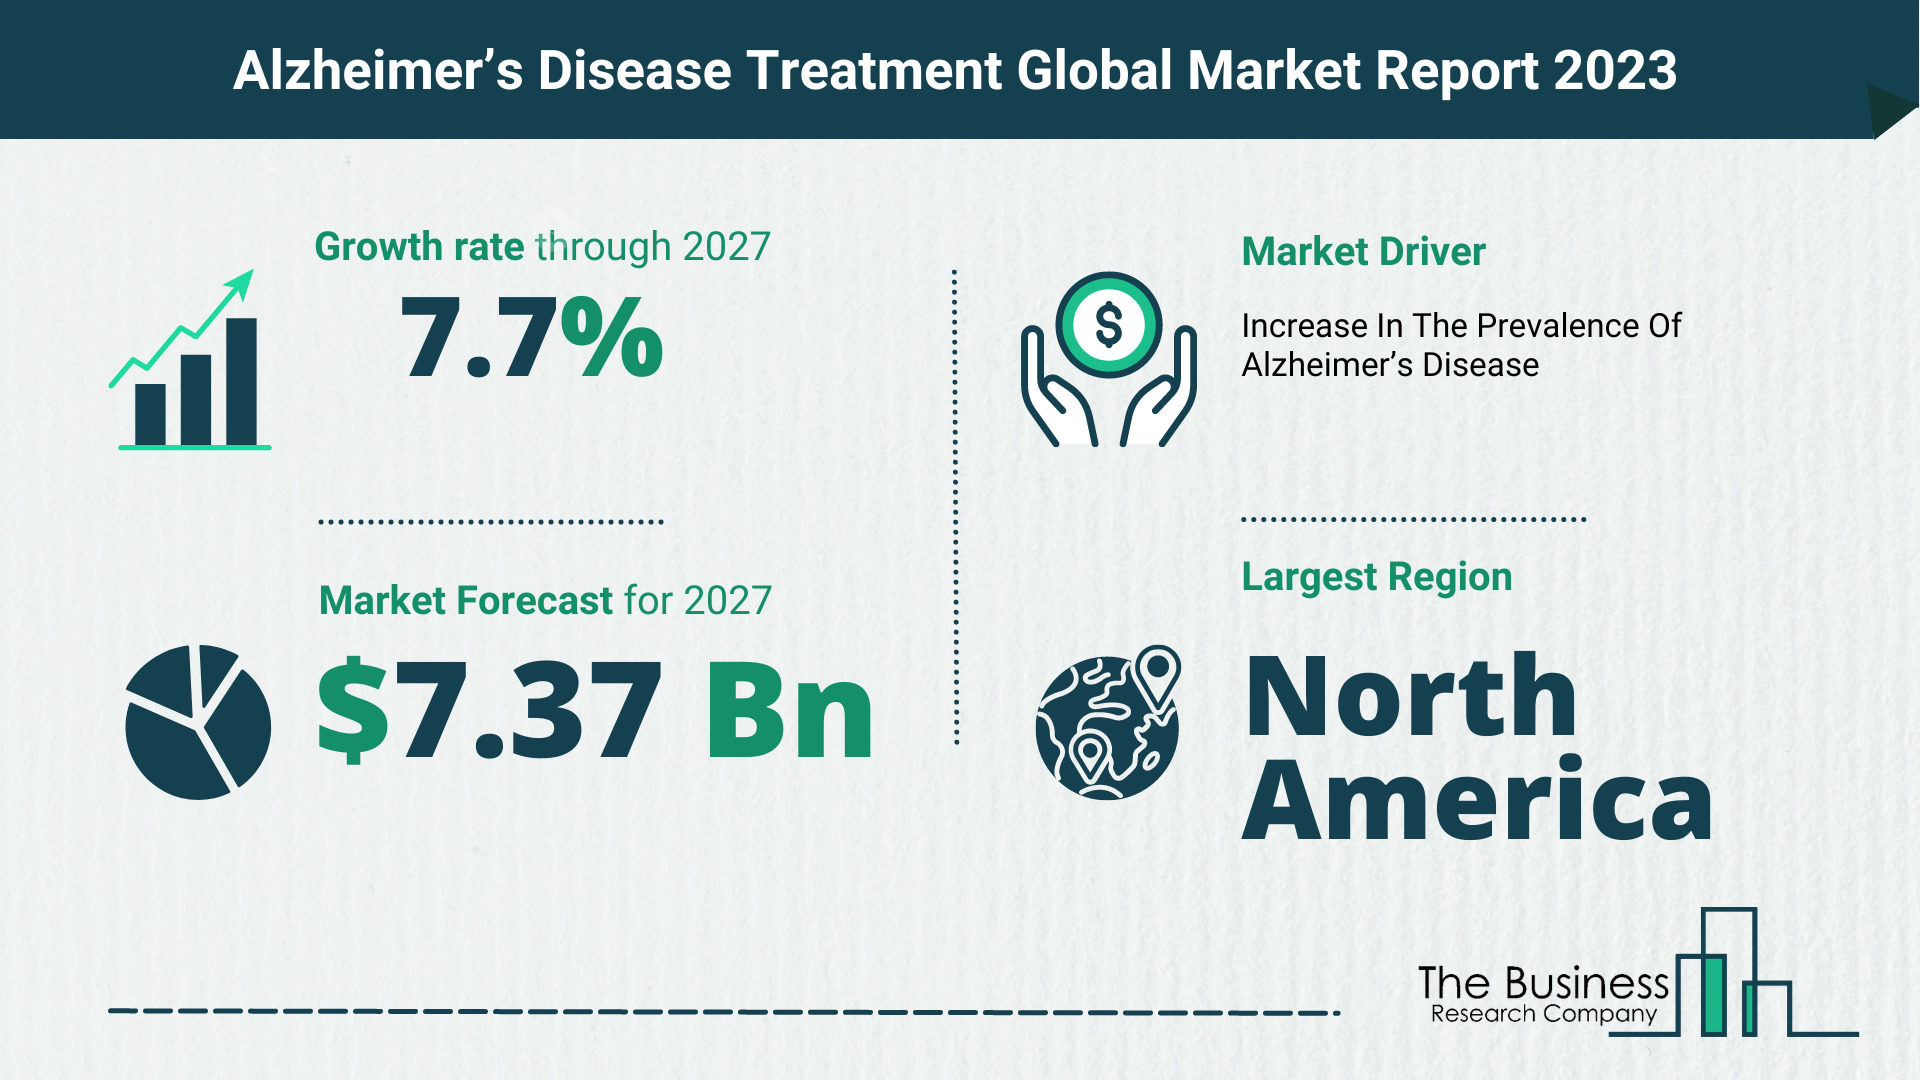 Alzheimer’s Disease Treatment Market Size, Share, And Growth Rate Analysis 2023